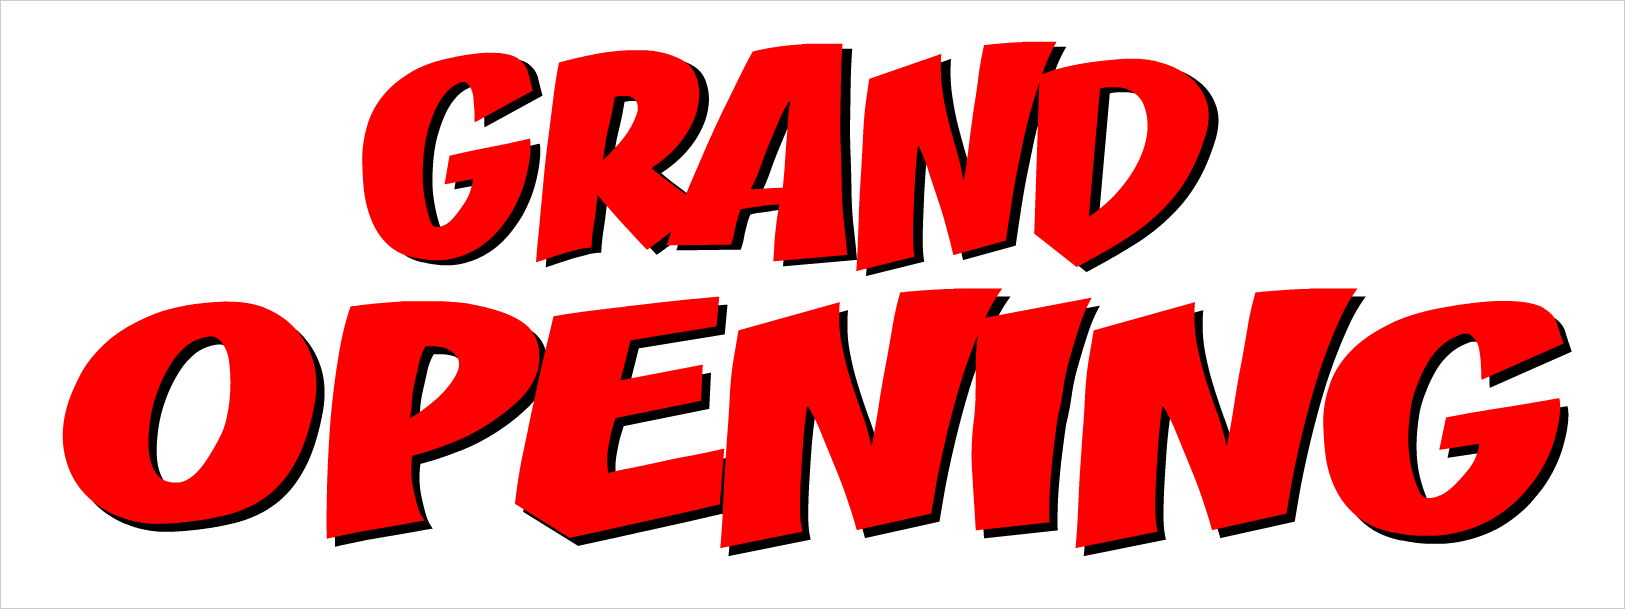 Grand Opening Custom Vinyl Banner In Stock And Ready To Ship Or